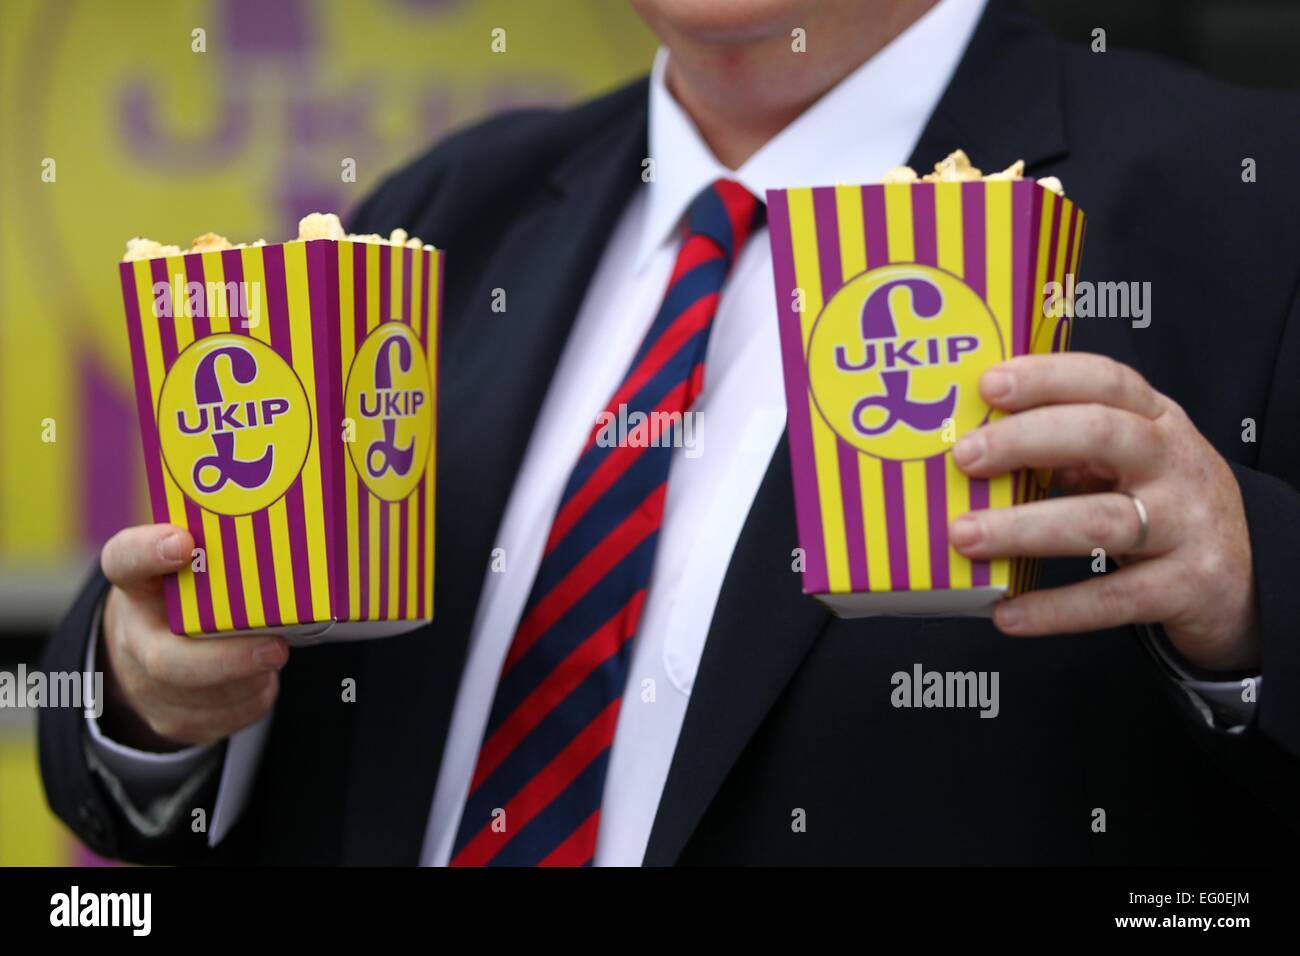 UK Independence Party members holding UKIP branded pop corn outside the Movie Starr Cinema in Canvery Island. Stock Photo